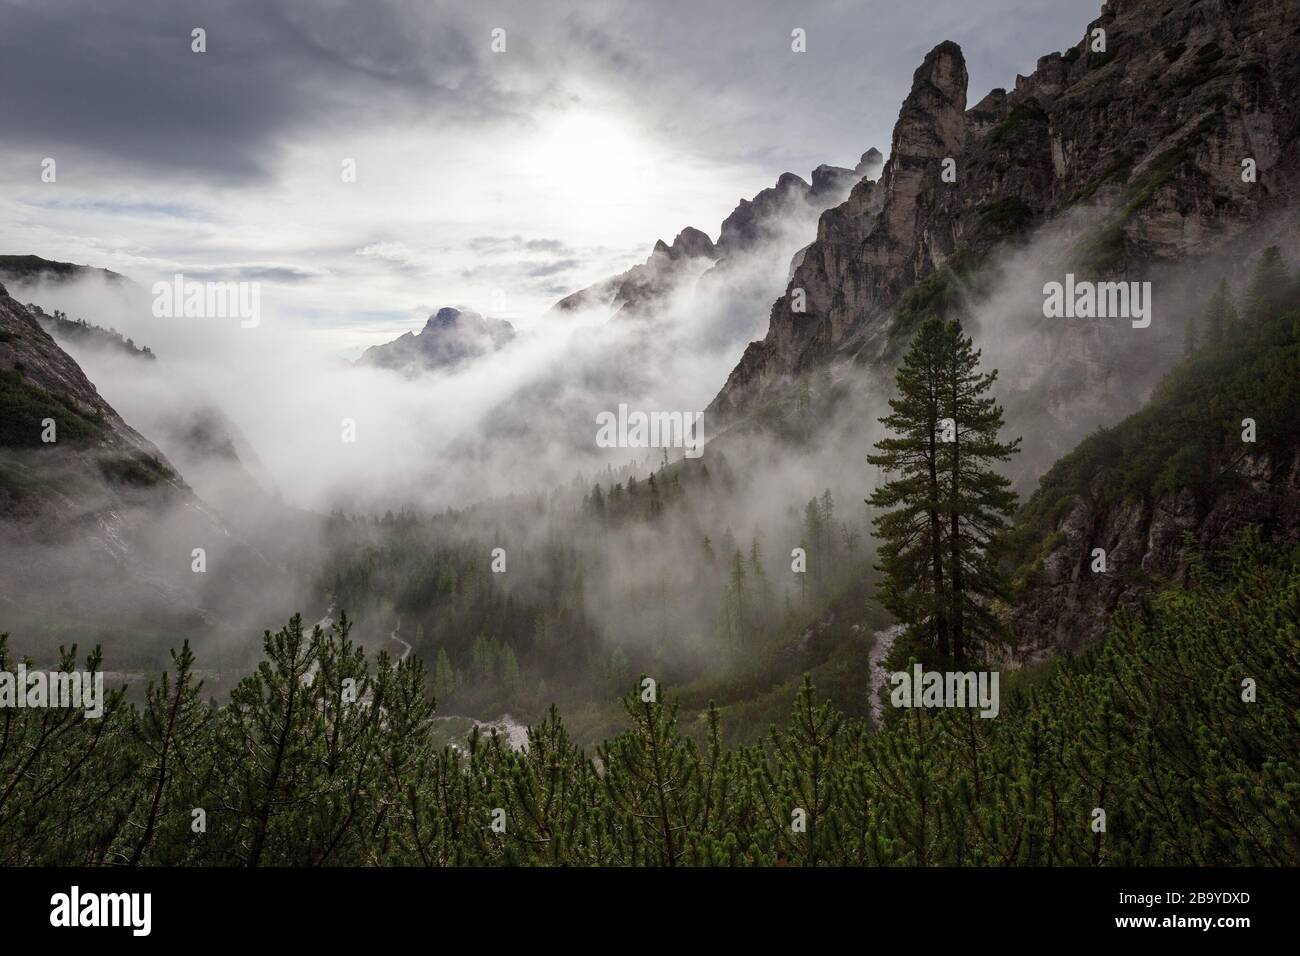 Backlight, fog and clouds on the alpine valley. Black white mountain landscape with Pinus cembra tree. The Sexten Dolomites. Italian Alps. Europe. Stock Photo